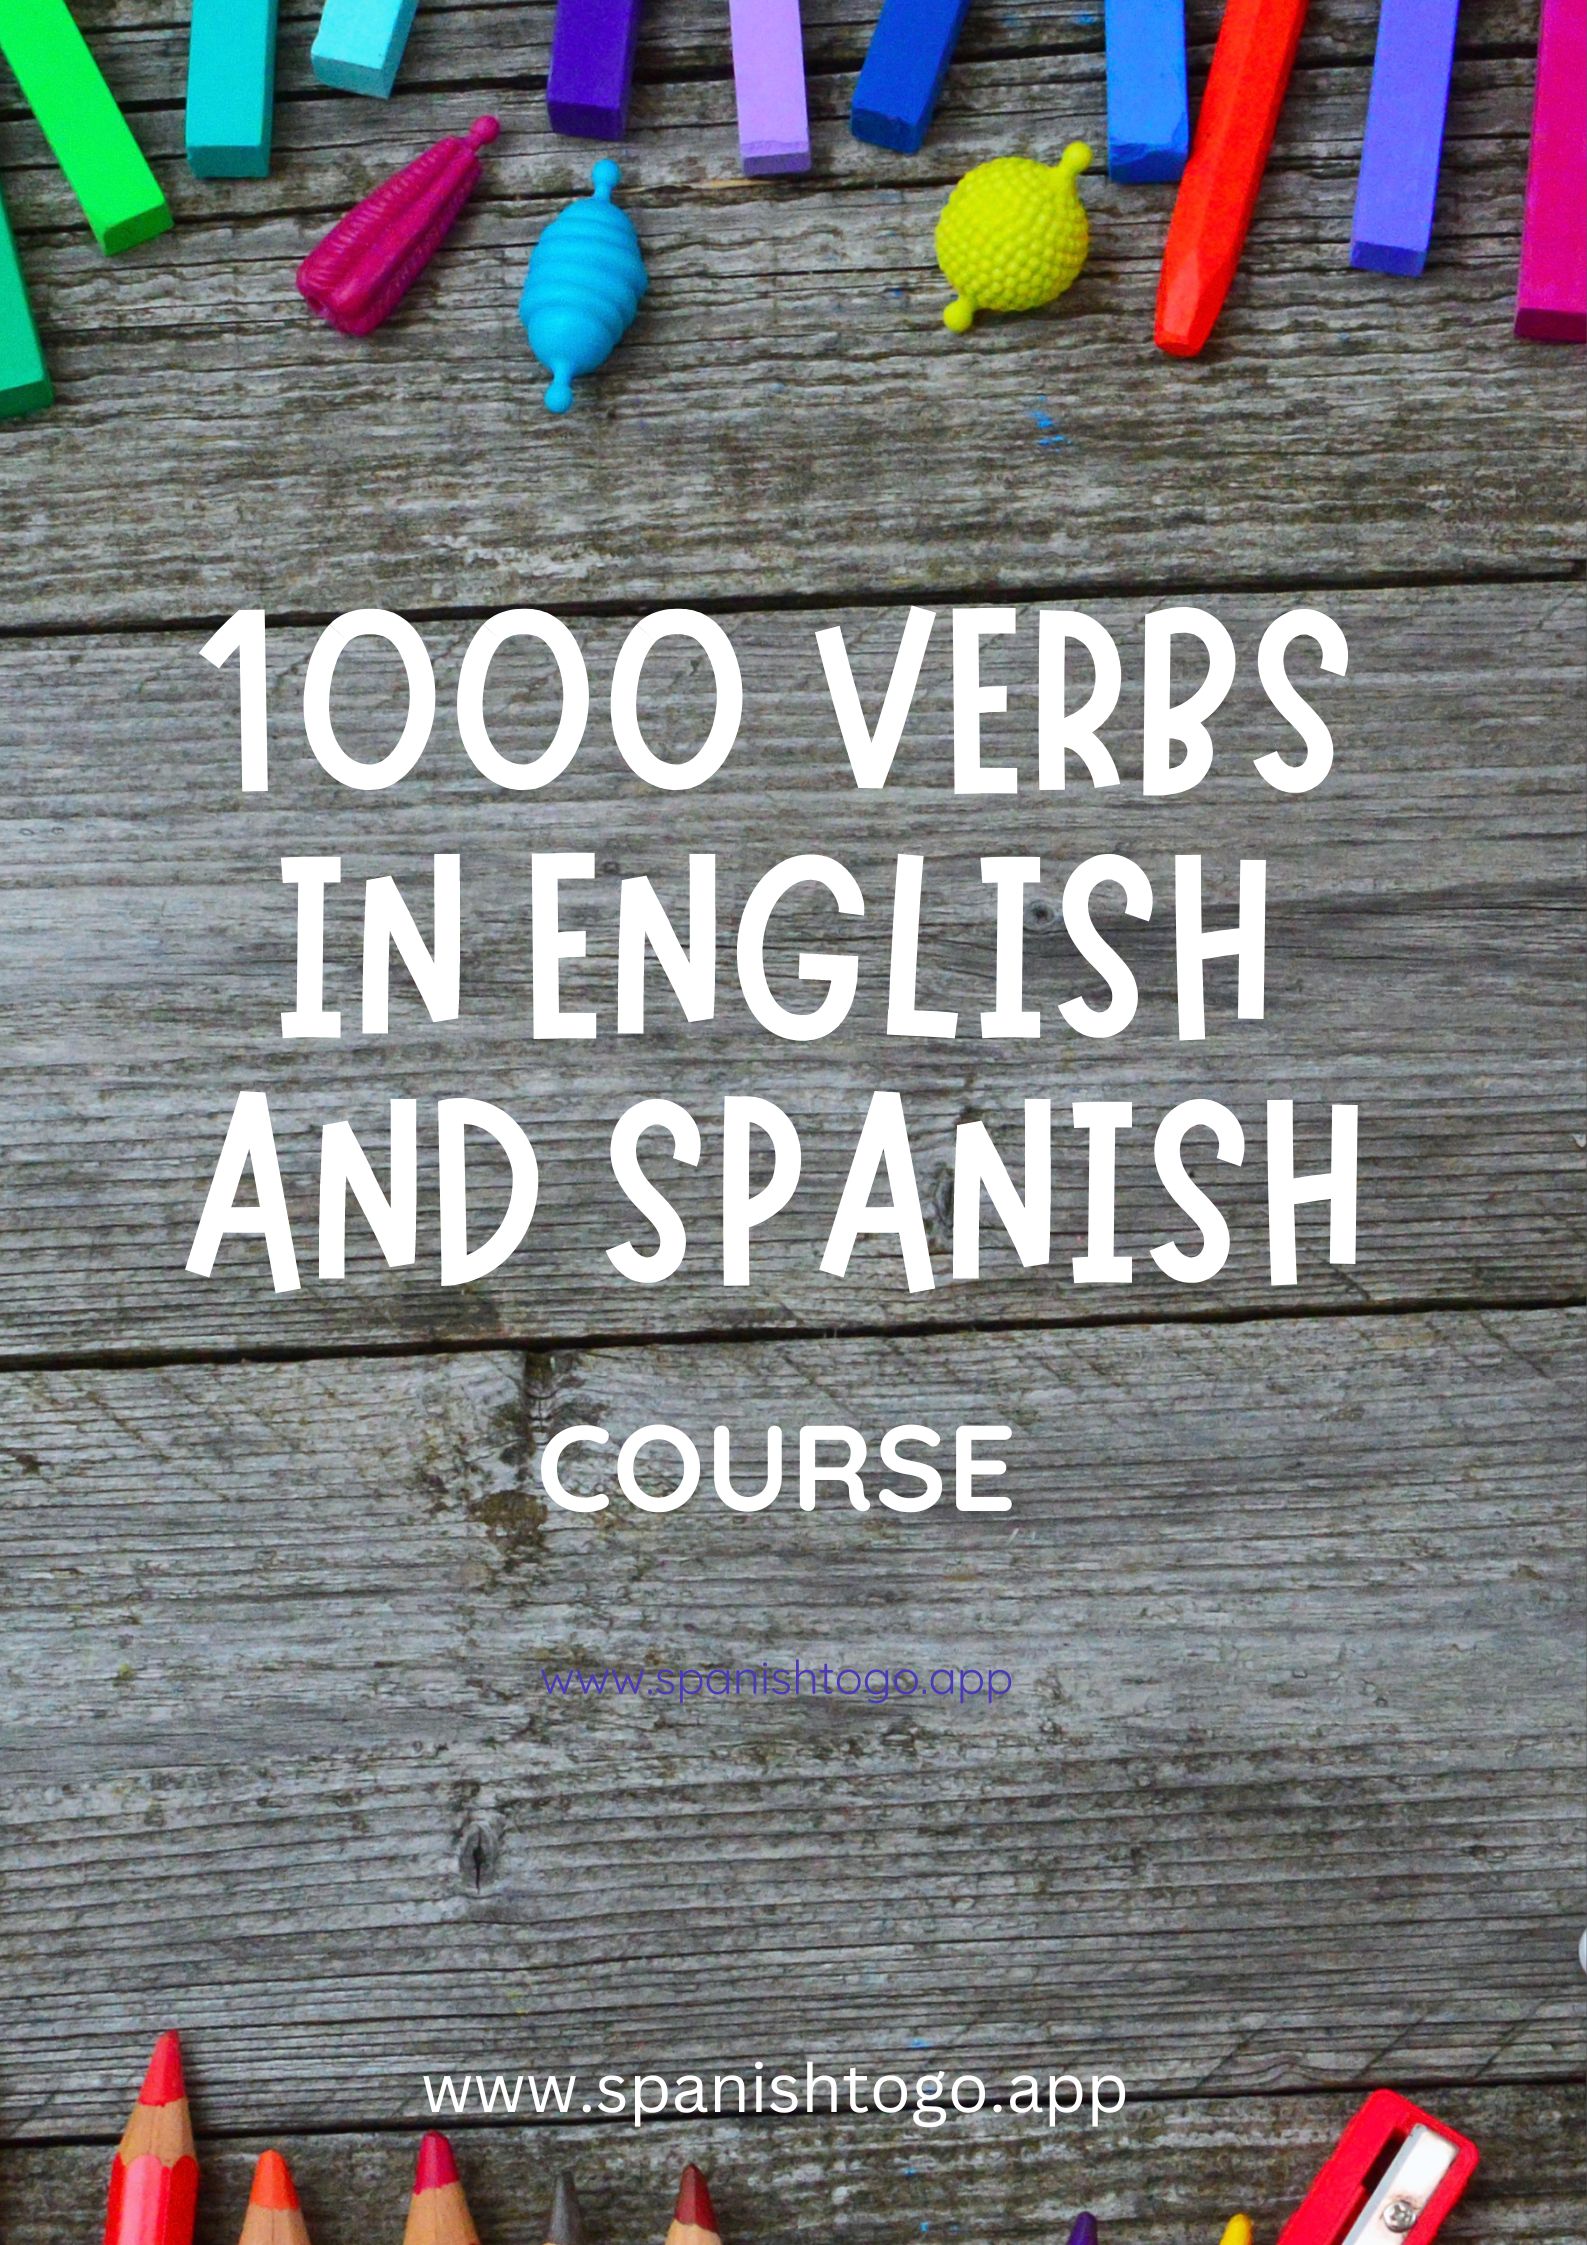 1000 Verbs in English and Spanish